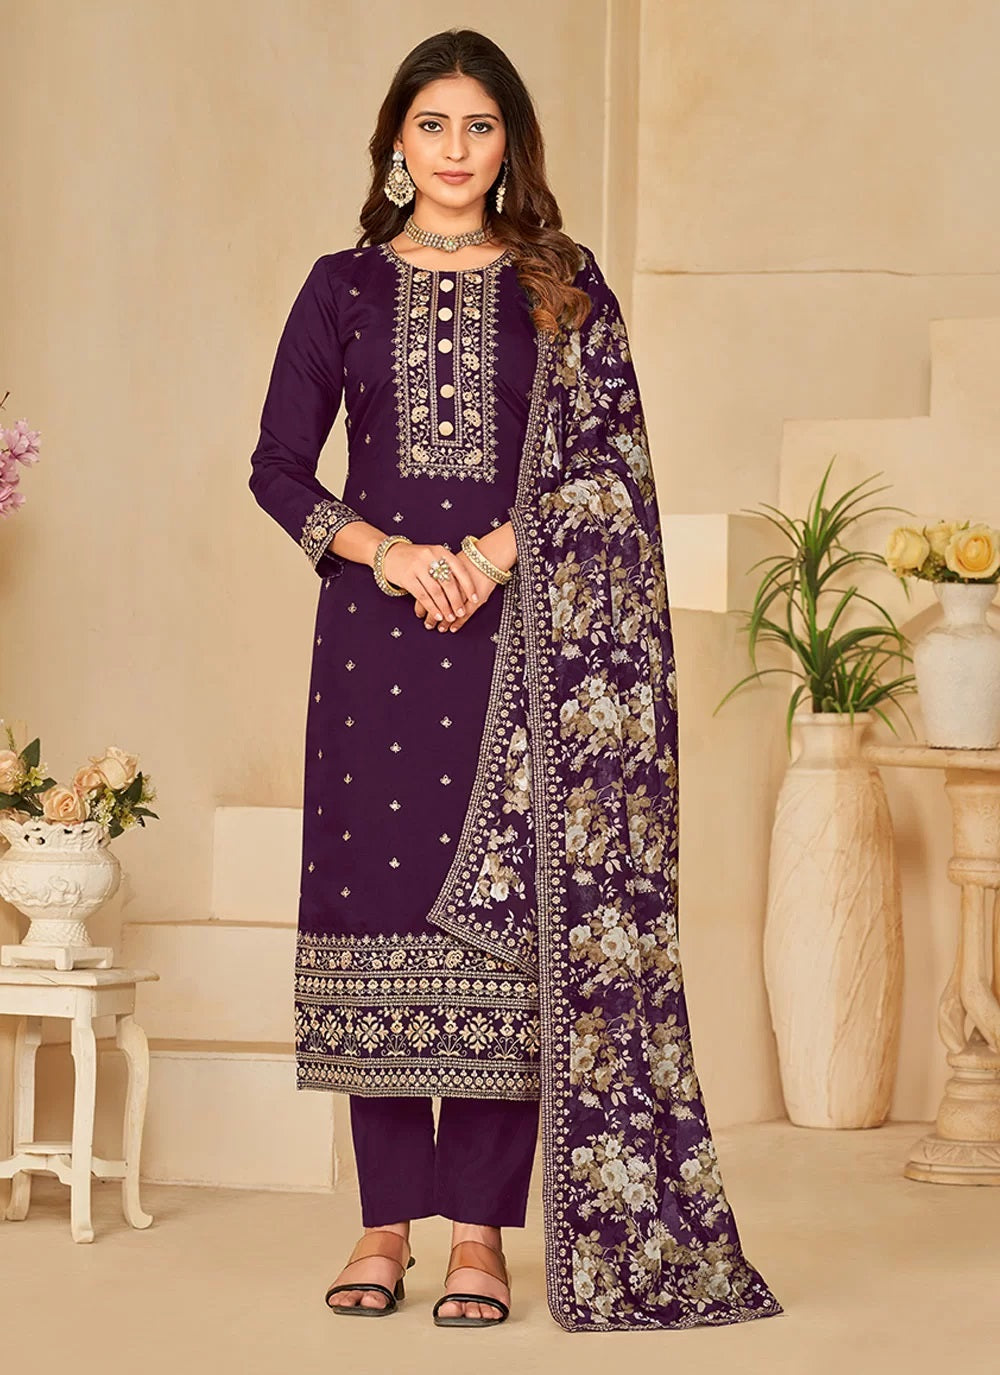 Image showcasing a Purple Silk Sequins Embroidered Pakistani Pant Suit - featuring intricate embroidery and sequin work on luxurious silk fabric, a stylish ensemble perfect for special occasions